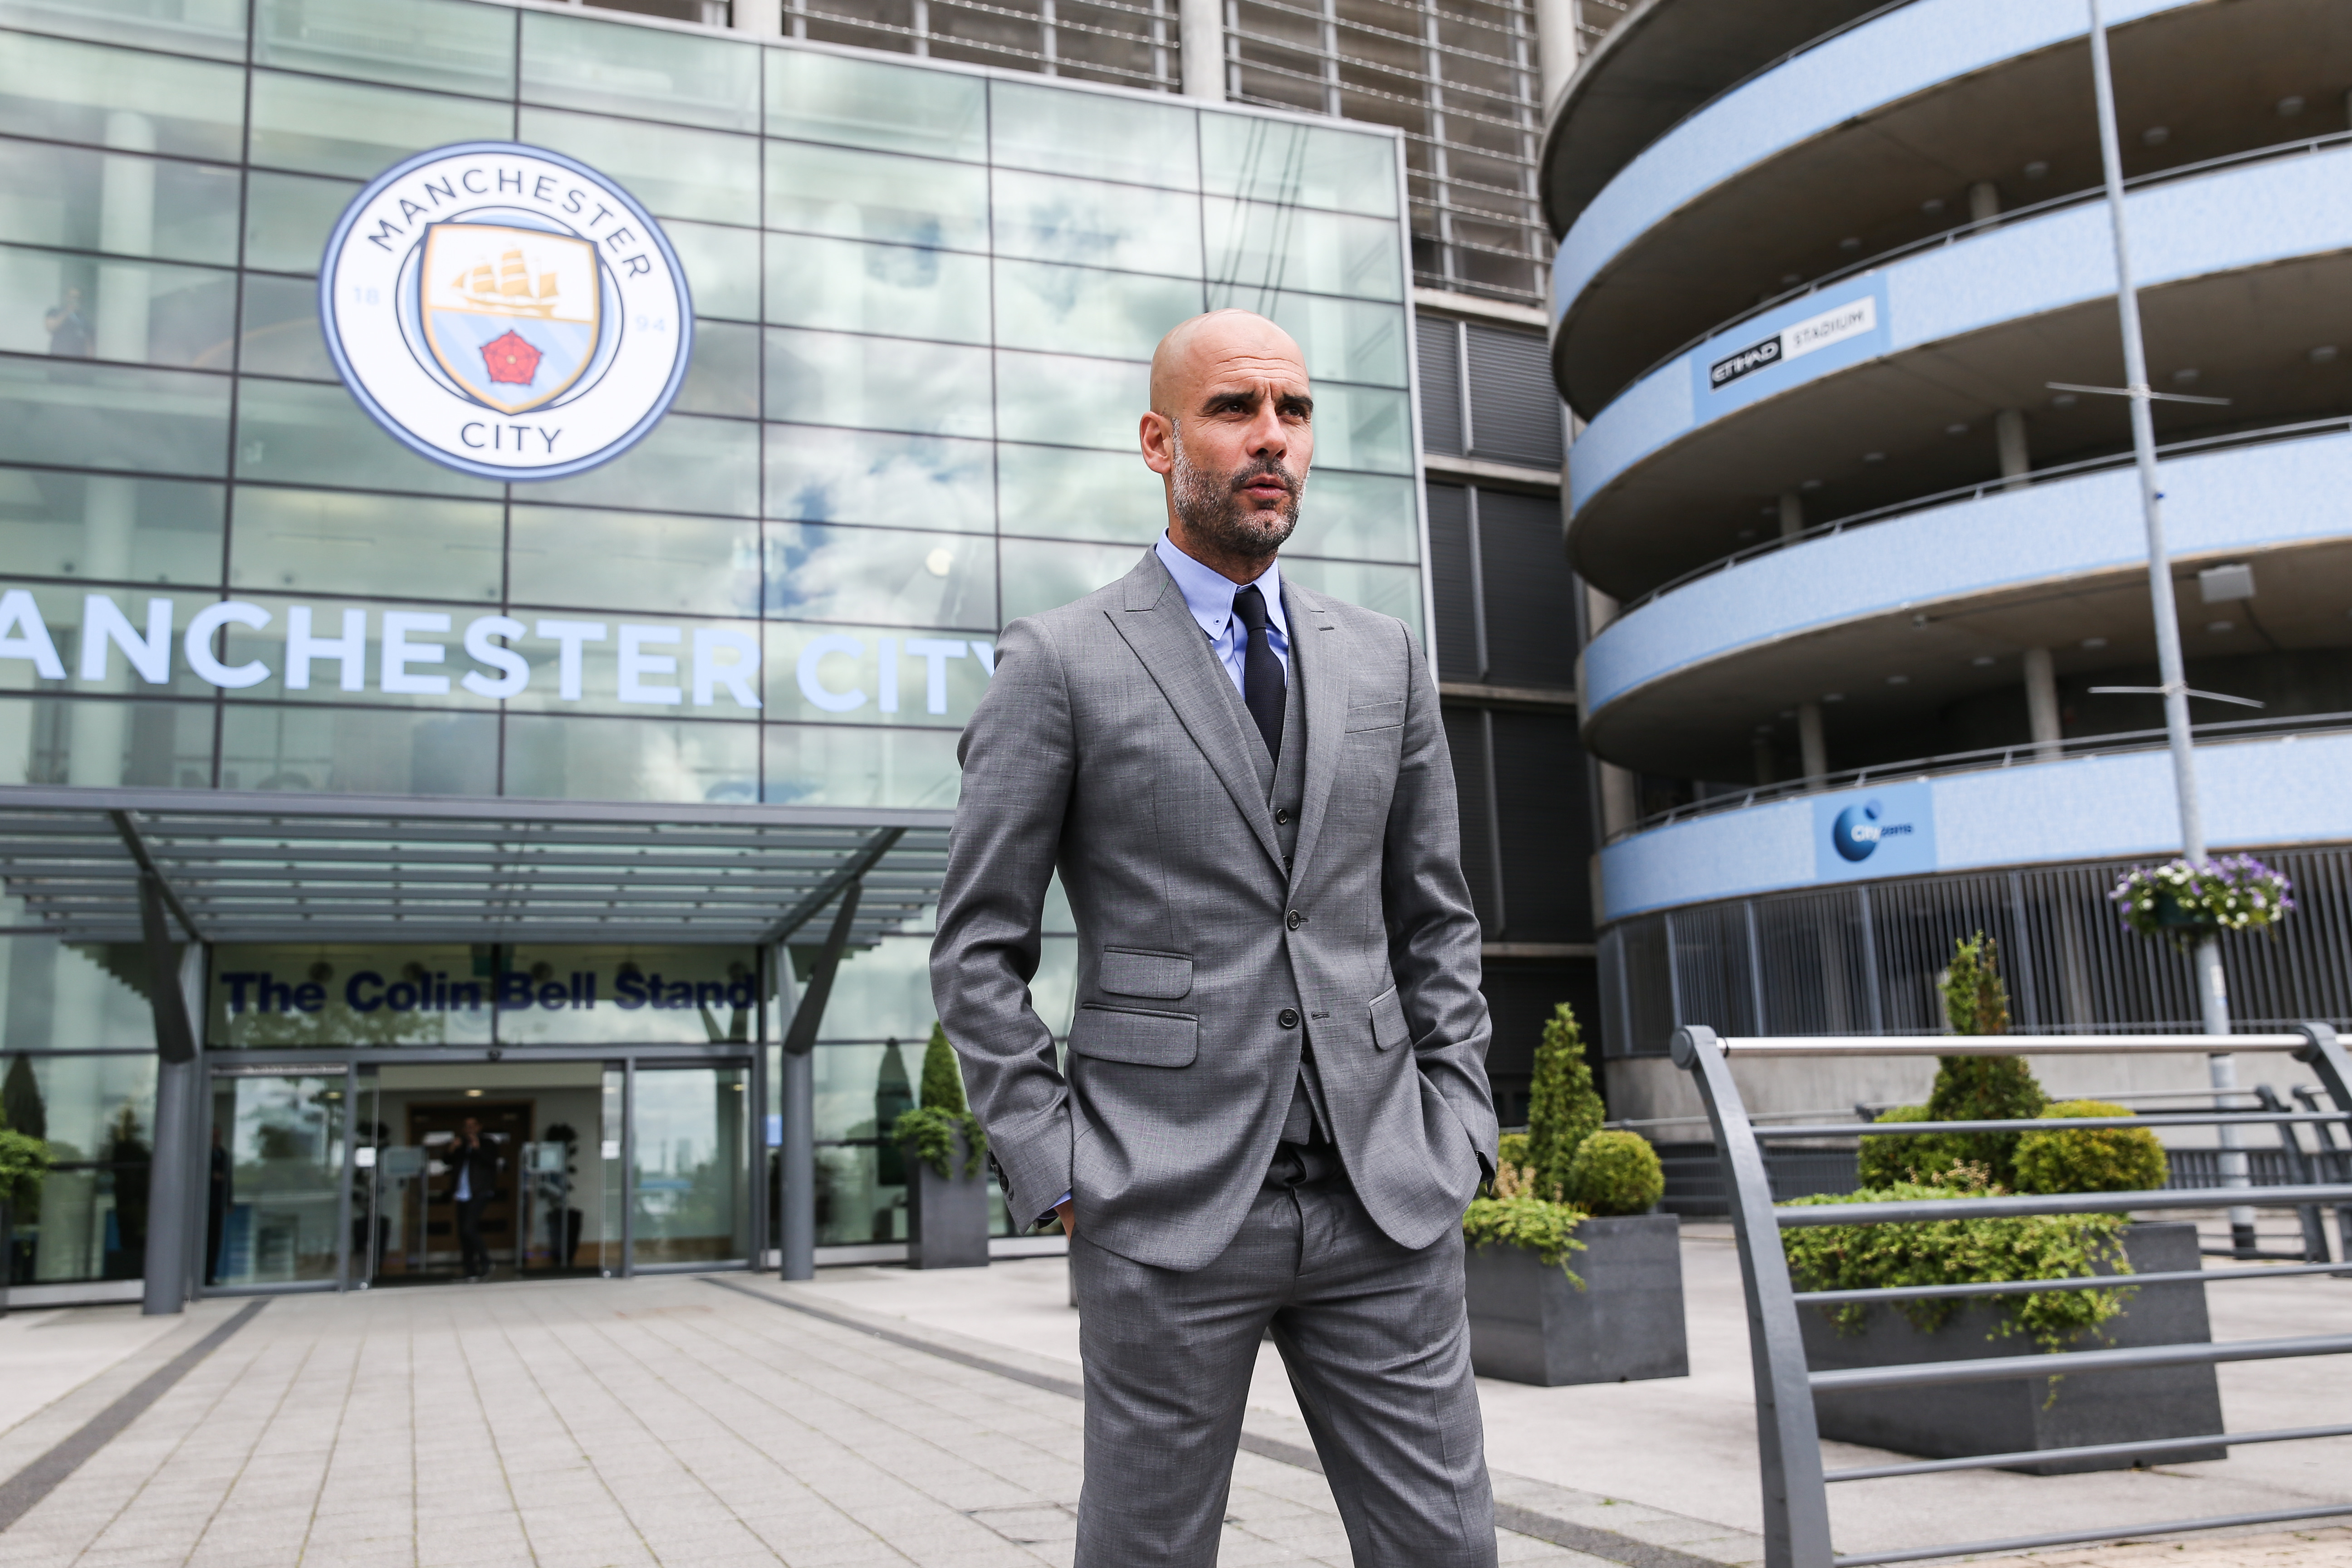 MANCHESTER, ENGLAND - JULY 08: Manchester City's manager Pep Guardiola poses for photographs outside the Etihad Stadium on July 8, 2016 in Manchester, England. (Photo by Barrington Coombs/Getty Images)